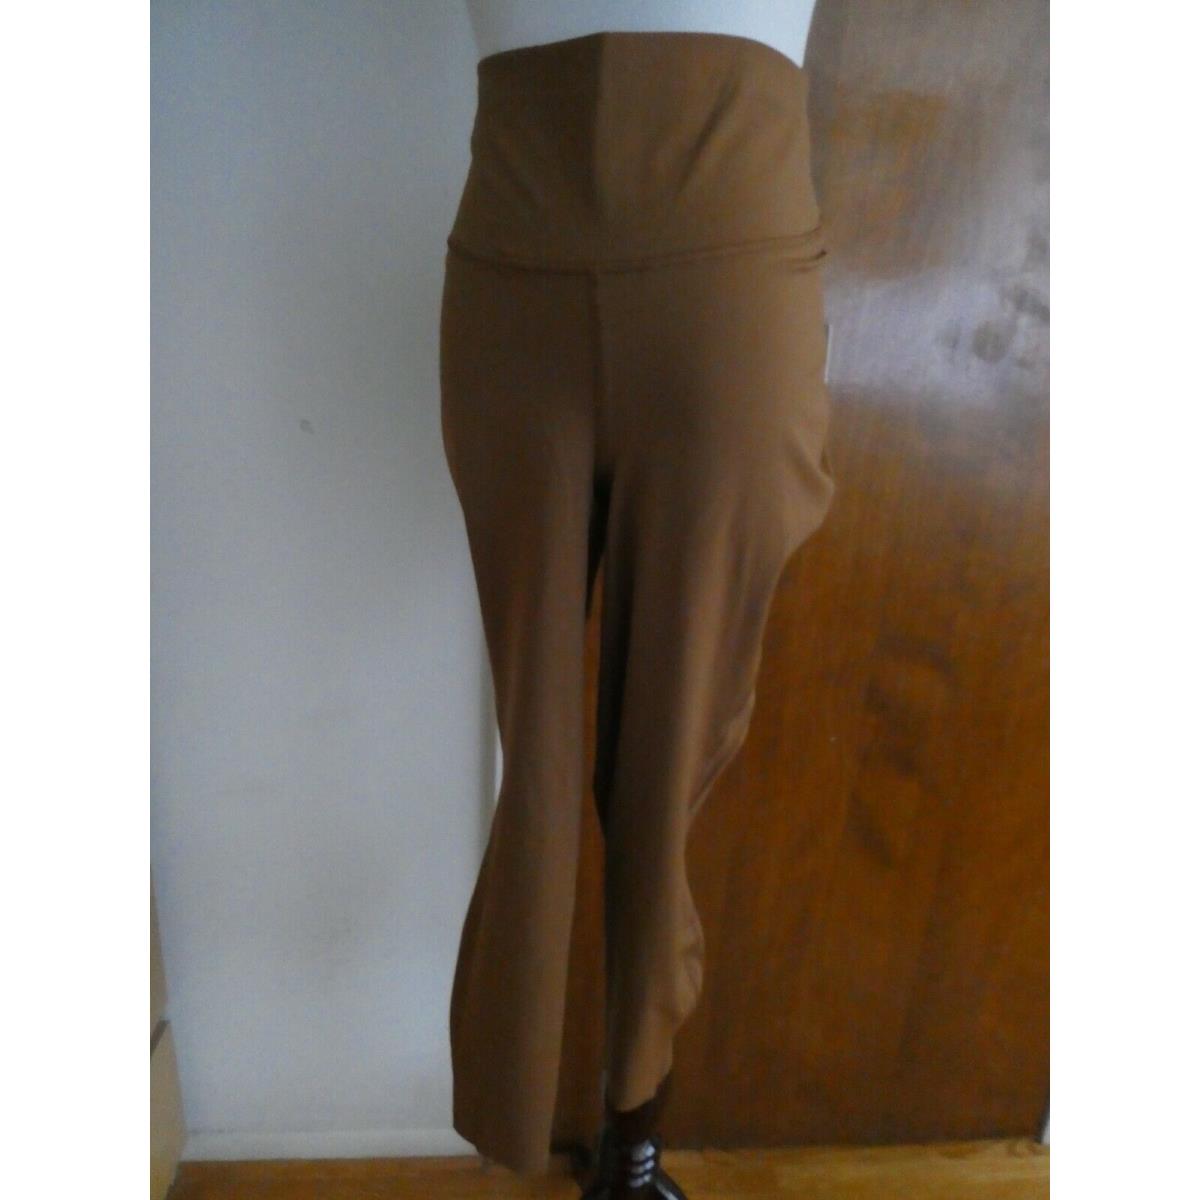 Lululemon Women s Base Pace HR Tight 25 Brown RN 106259 Size 16 20